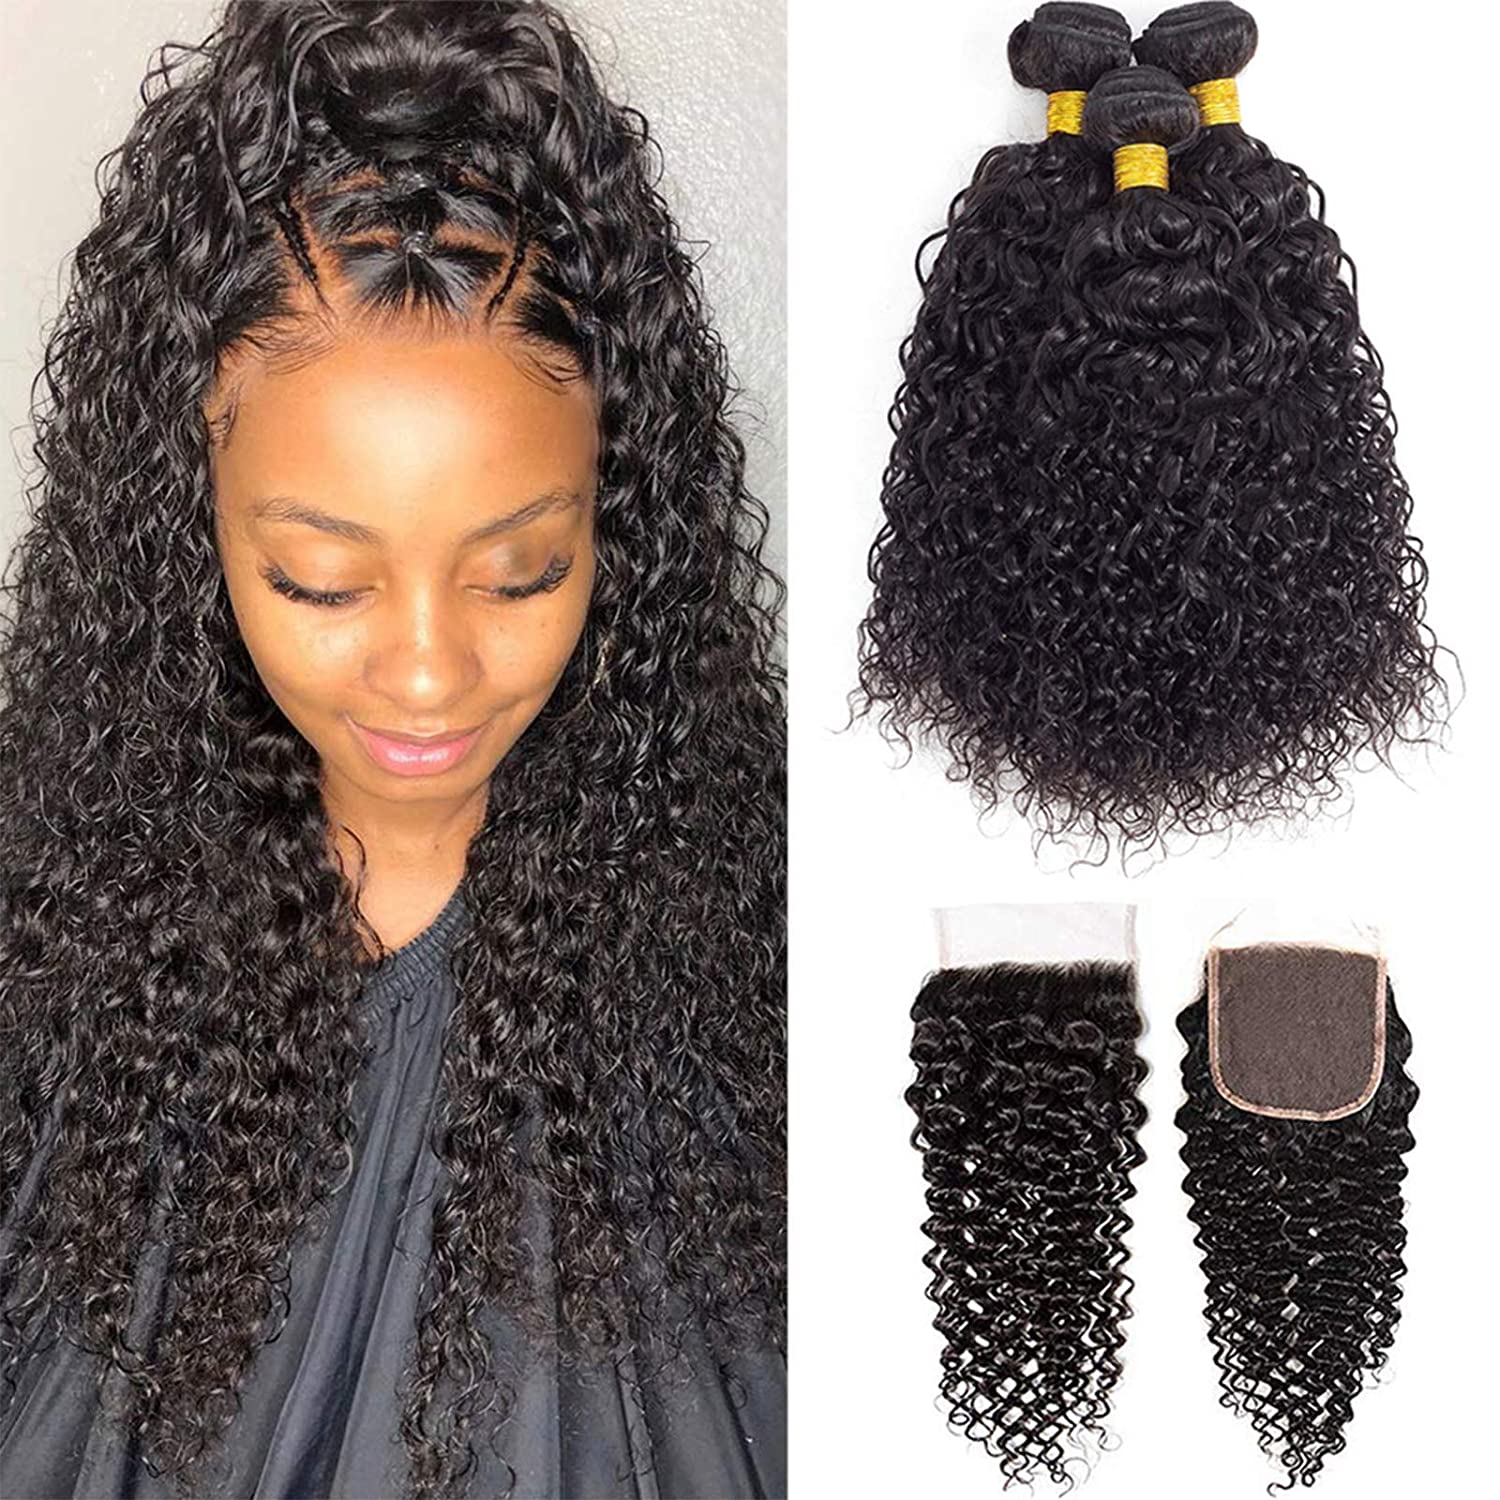 

Brazilian Remy Virgin Curly Hair 3 Bundles with 4X4 Lace Closure Free Part 100% Unprocessed Virgin Remy Hair Bouncy Curly Human Hair Weave Bundles with Closure 9A, Natural color